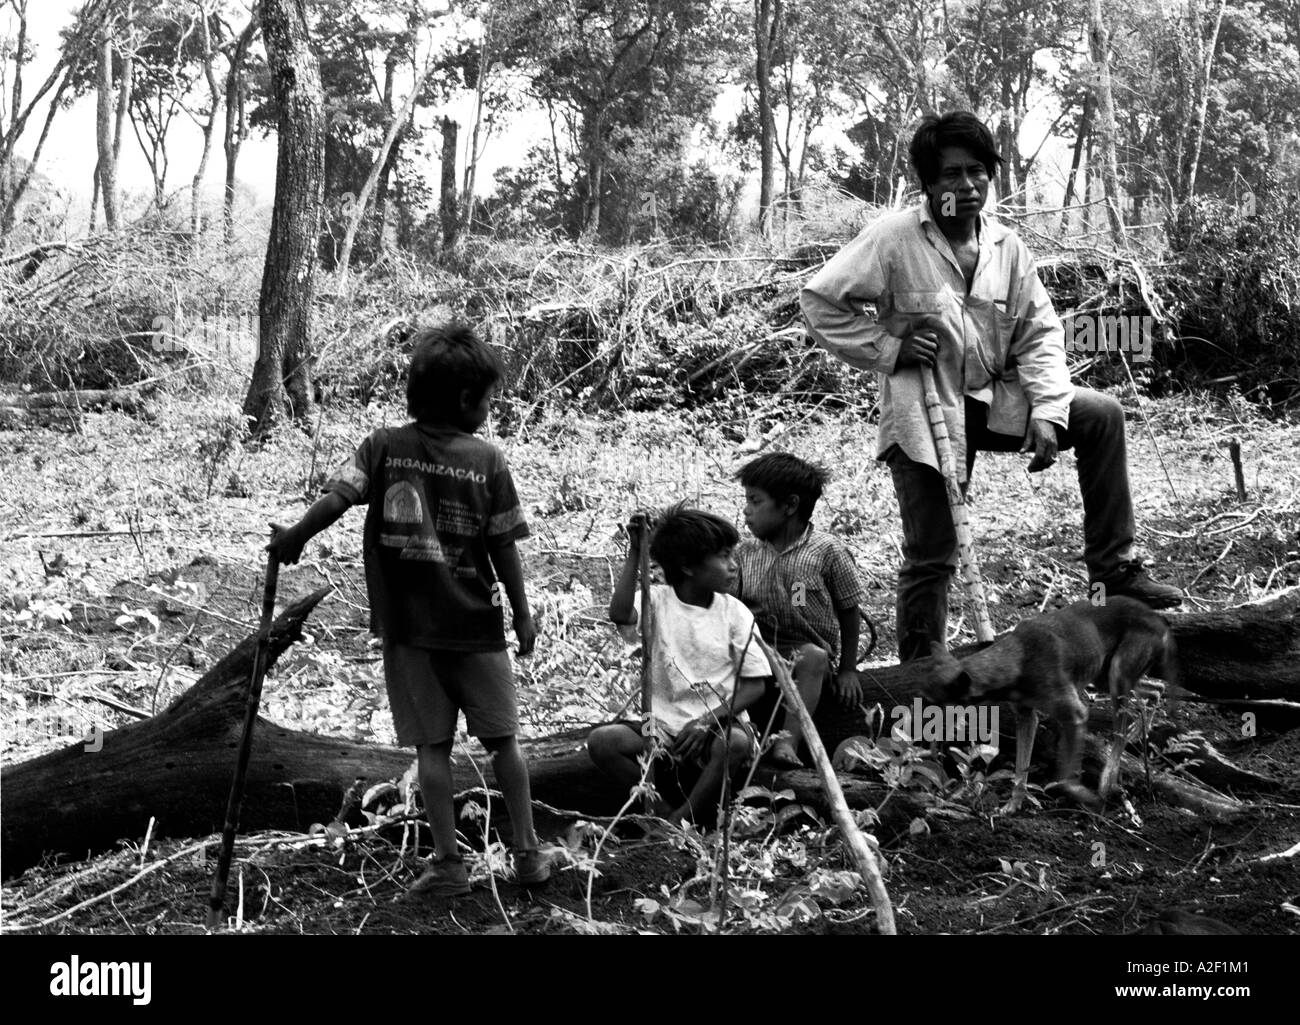 Guarani-Kaiowa indians in Brazil's Matto Grosso do Sul state survey damage done to sacred land by illegal logging Stock Photo